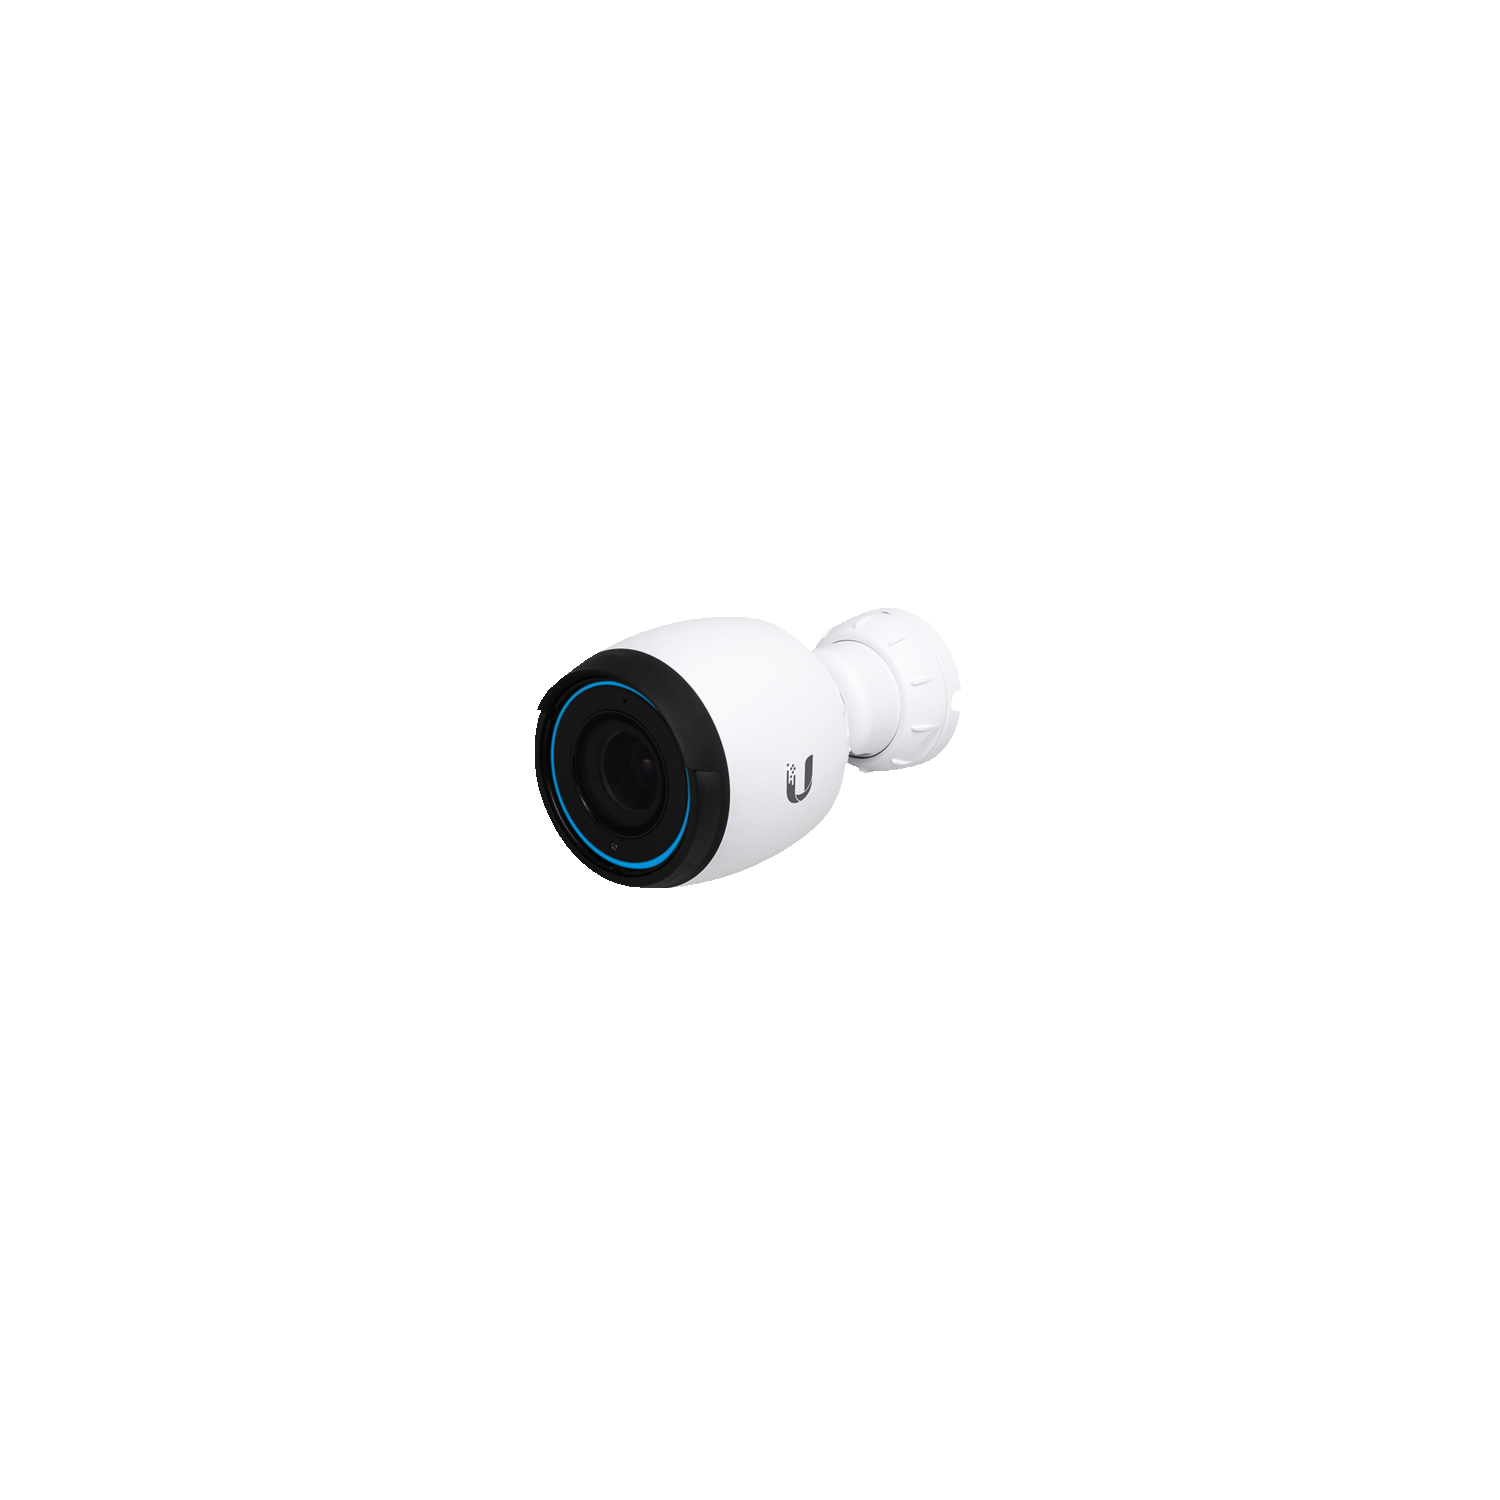 Ubiquiti UniFi Protect G4-PRO Wired Indoor/Outdoor 4K Ultra HD Add-On Security Camera - White - (UVC-G4-PRO)